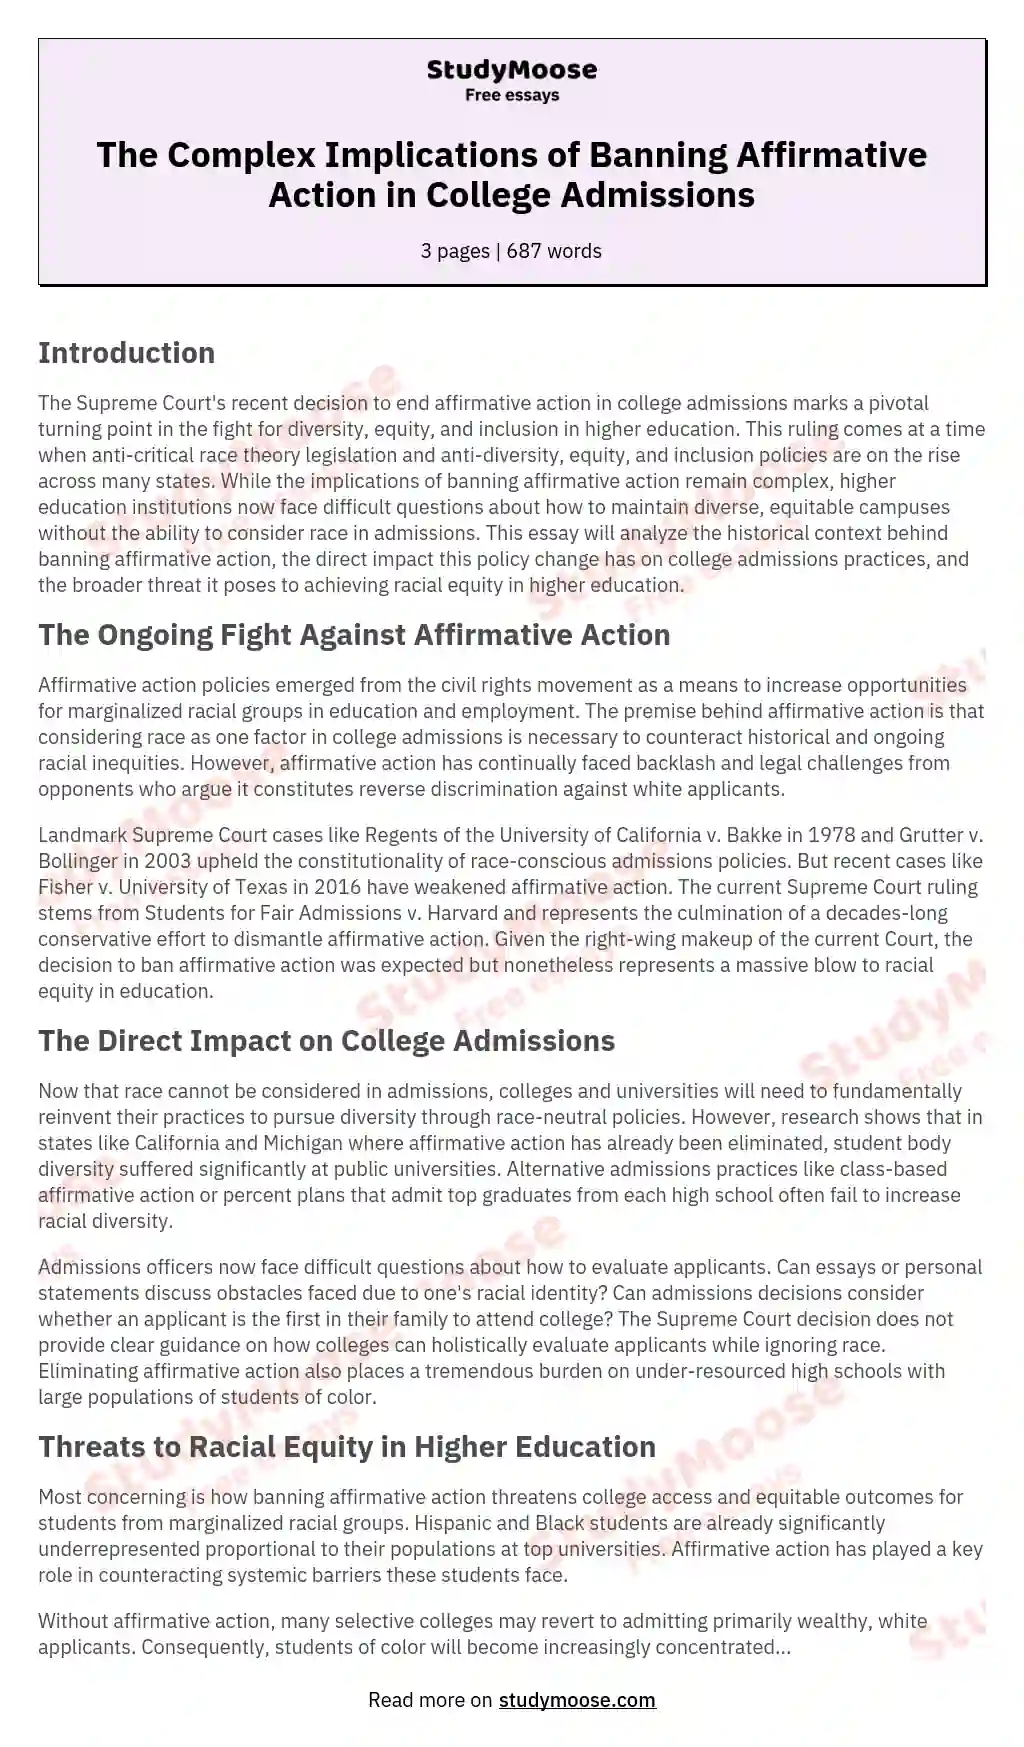 The Complex Implications of Banning Affirmative Action in College Admissions essay